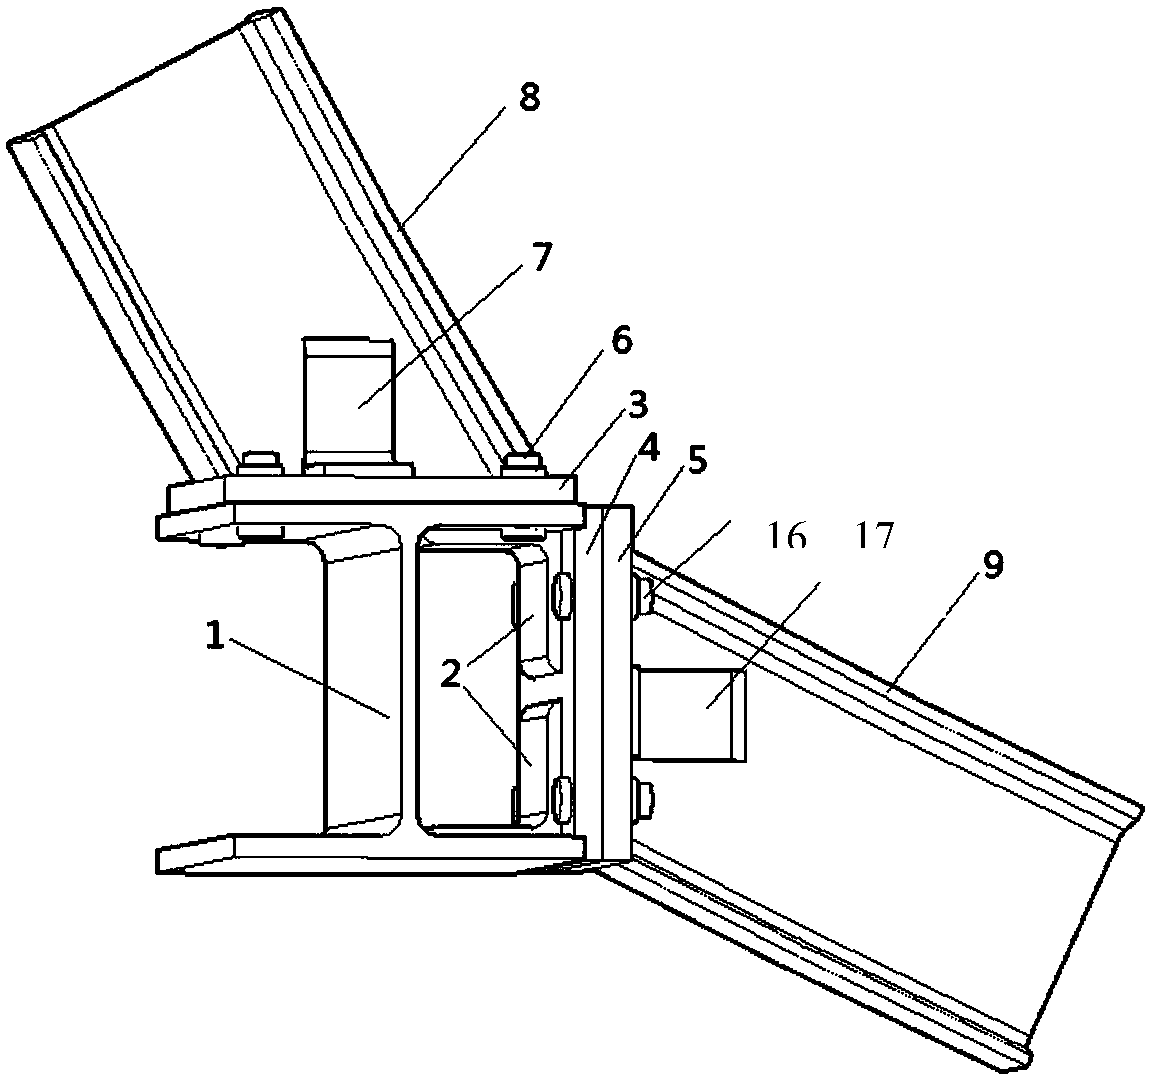 Connecting method of steel arch units for tunnel supporting